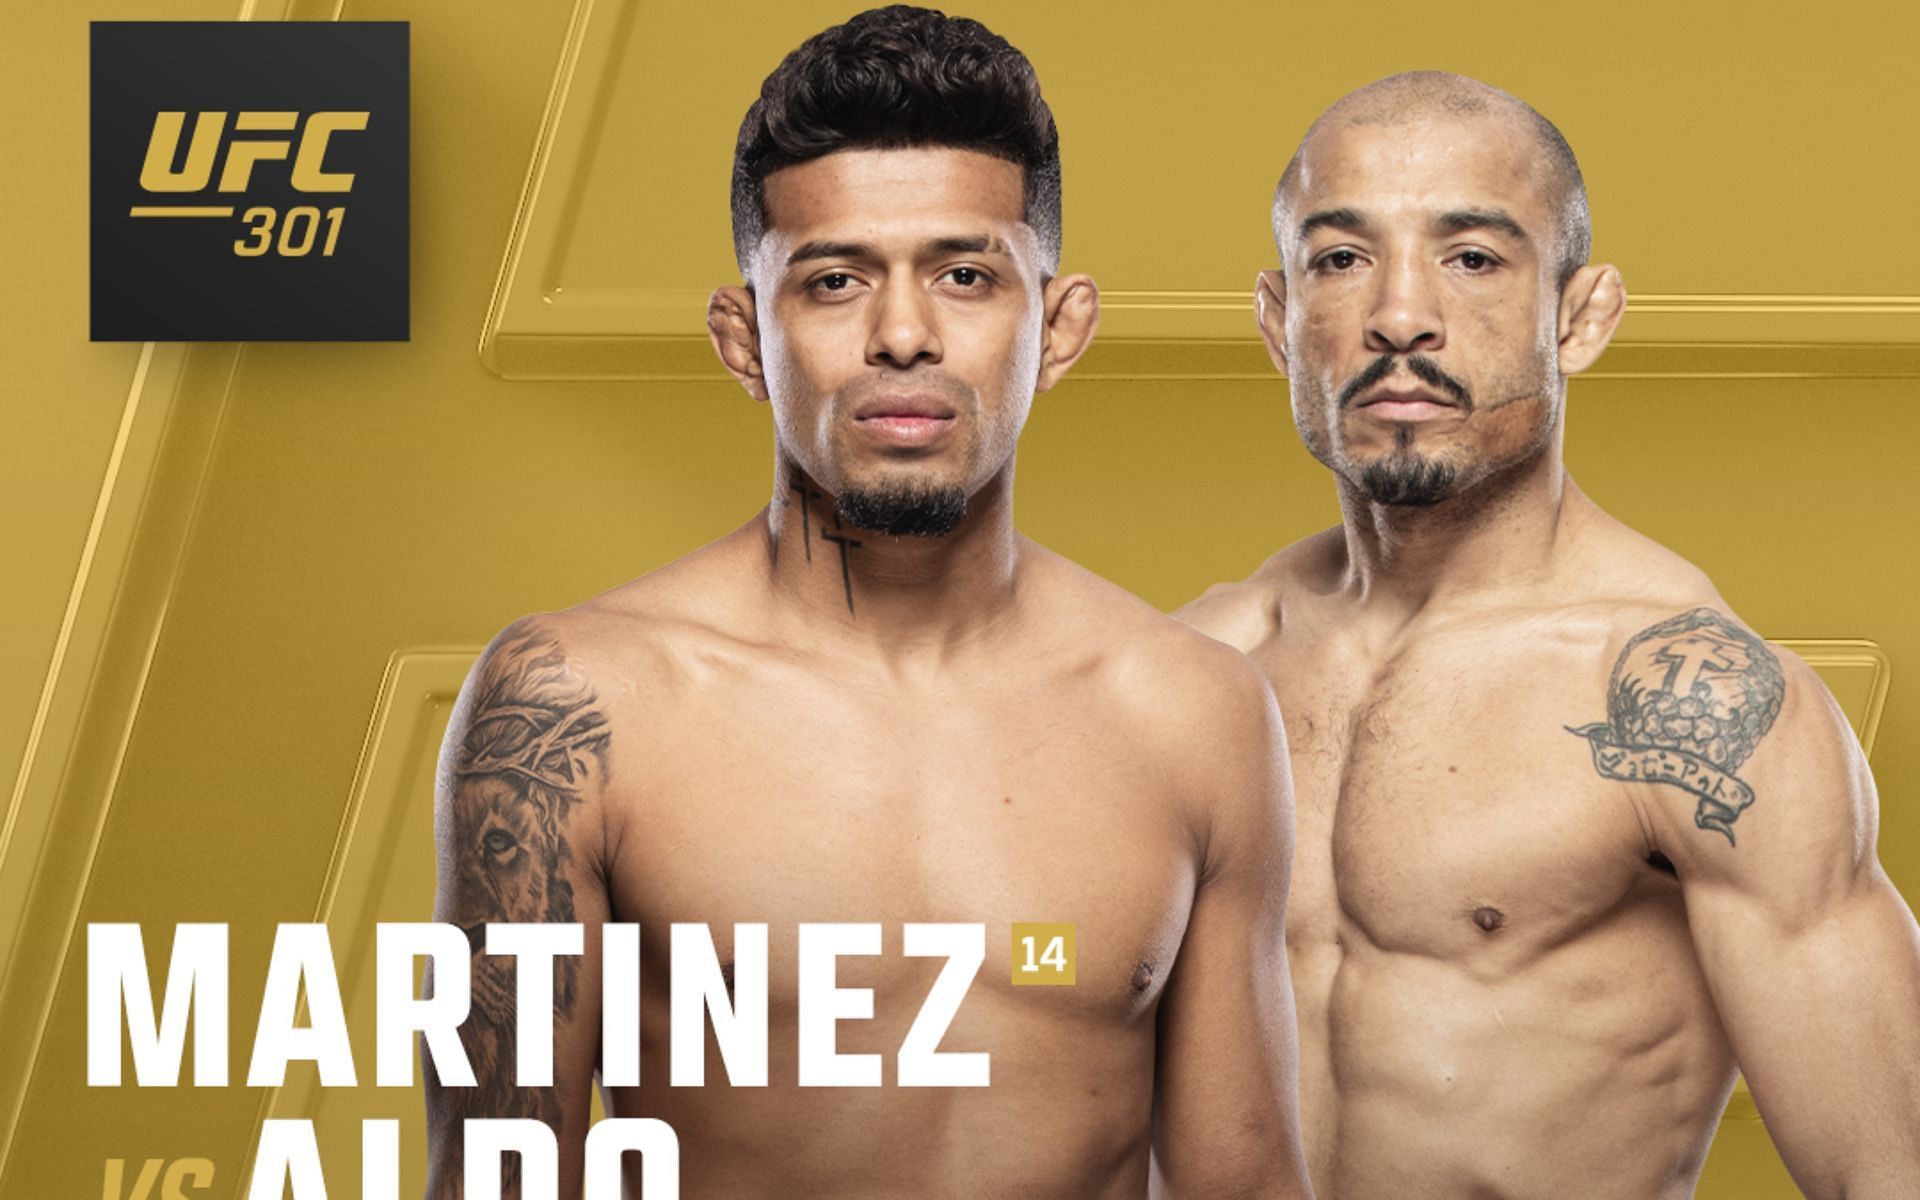 The return of the legendary Jose Aldo is the biggest highlight for the UFC in May